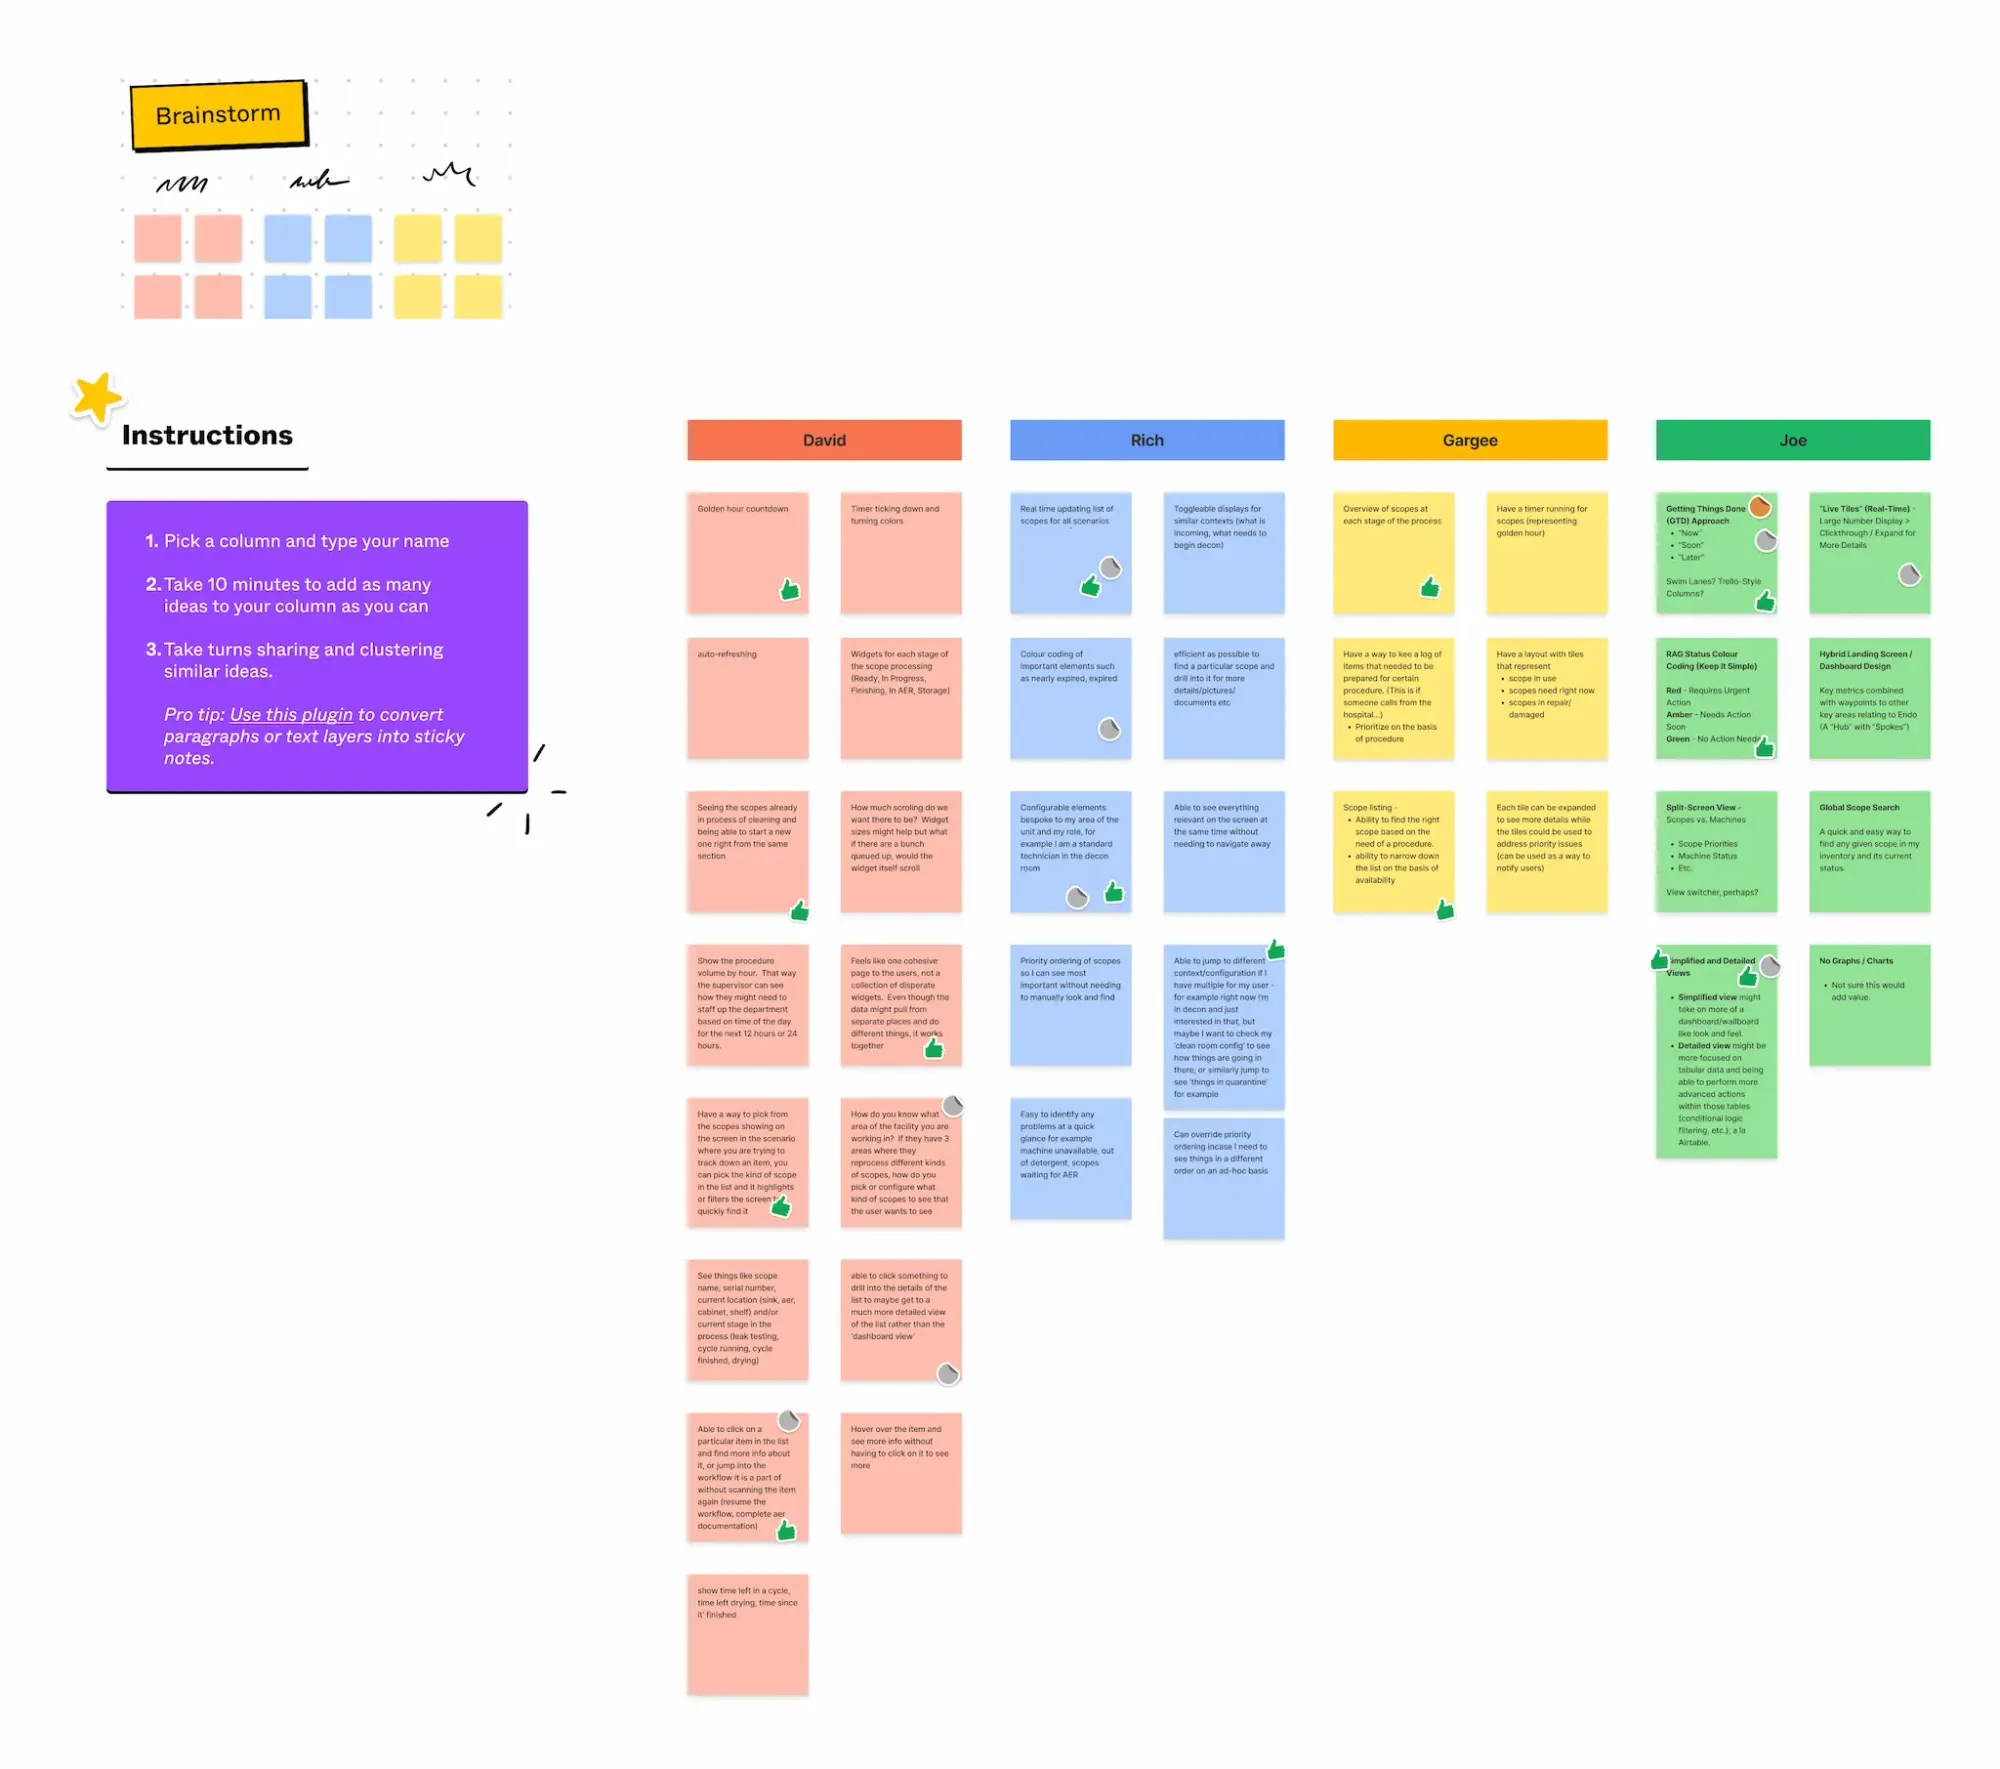 Collaborative ideation in FigJam: Colour-coded virtual sticky notes capture diverse ideas generated by a remote team during a high-level brainstorming session for the project.